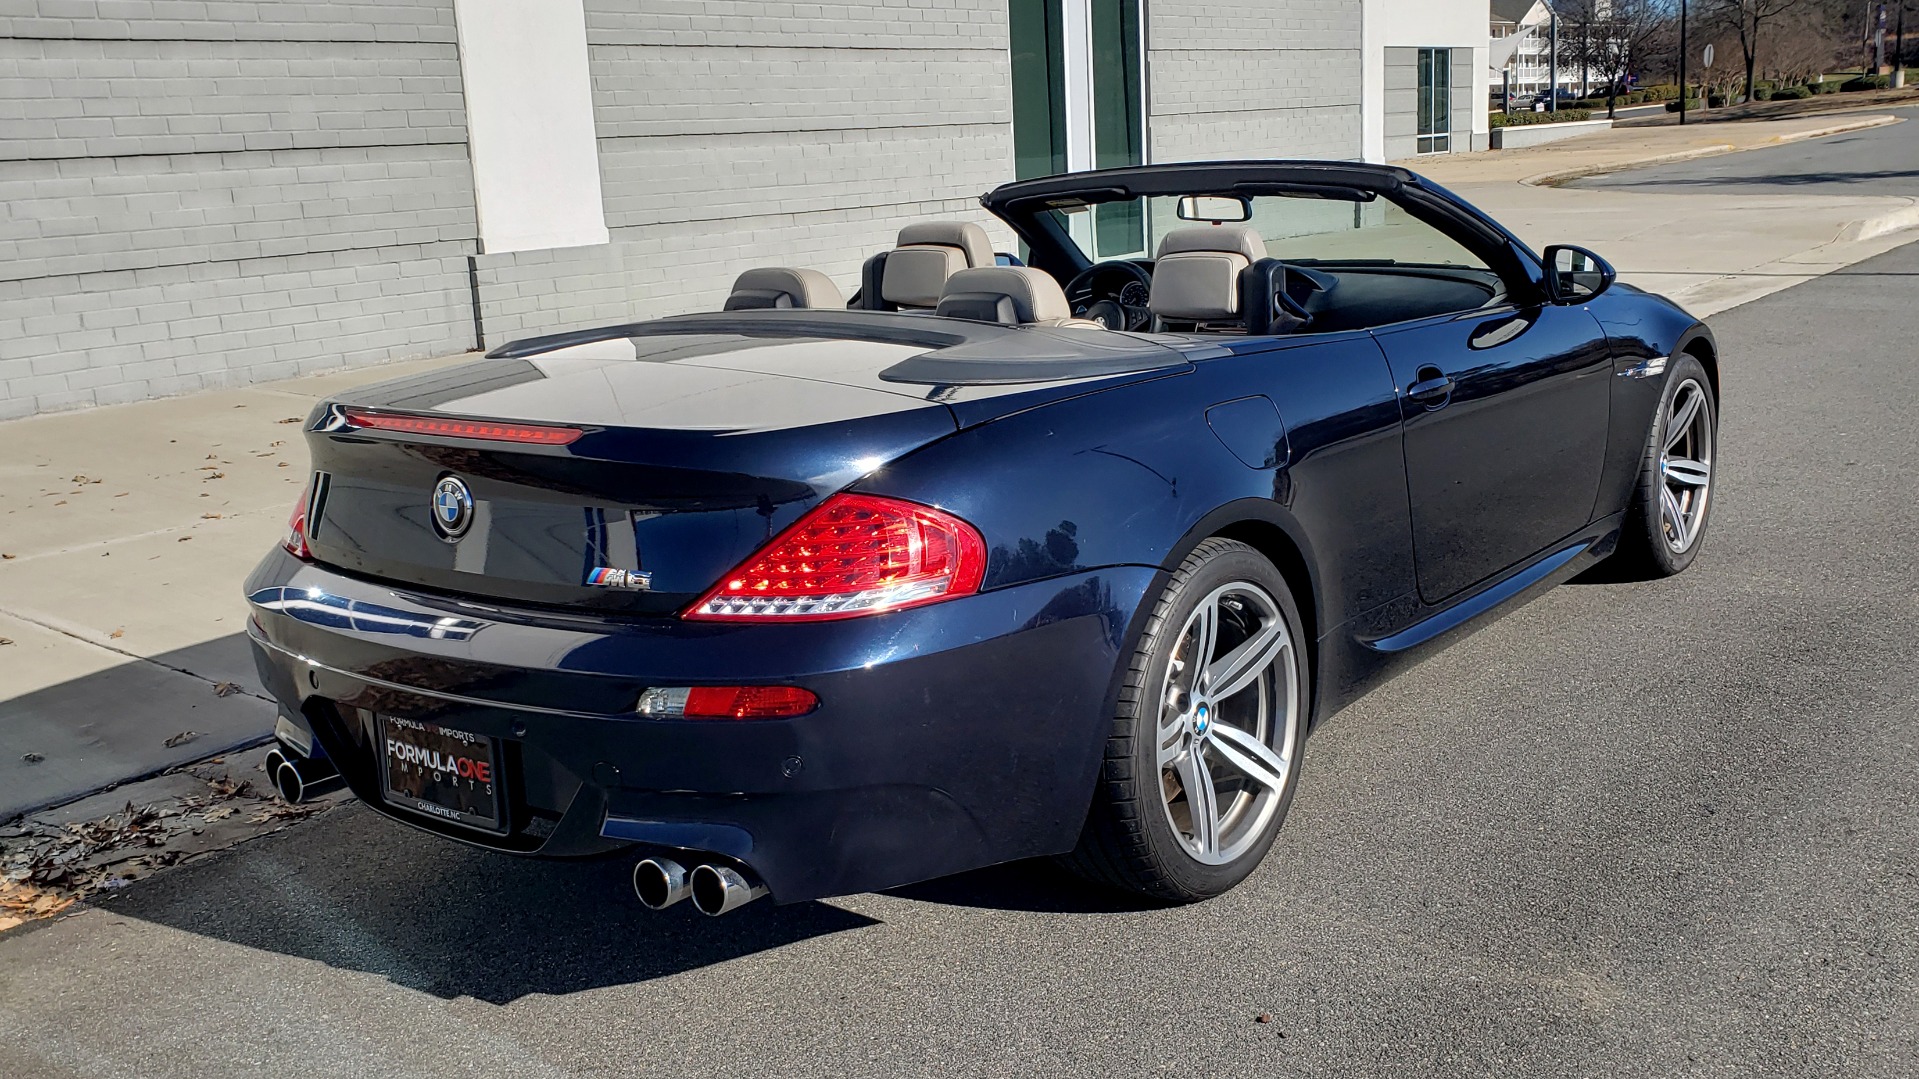 Used 2009 BMW M6 CONVERTIBLE / 5.0L V10 (500HP) / PREM SND / HUD / 19IN WHEELS for sale Sold at Formula Imports in Charlotte NC 28227 5